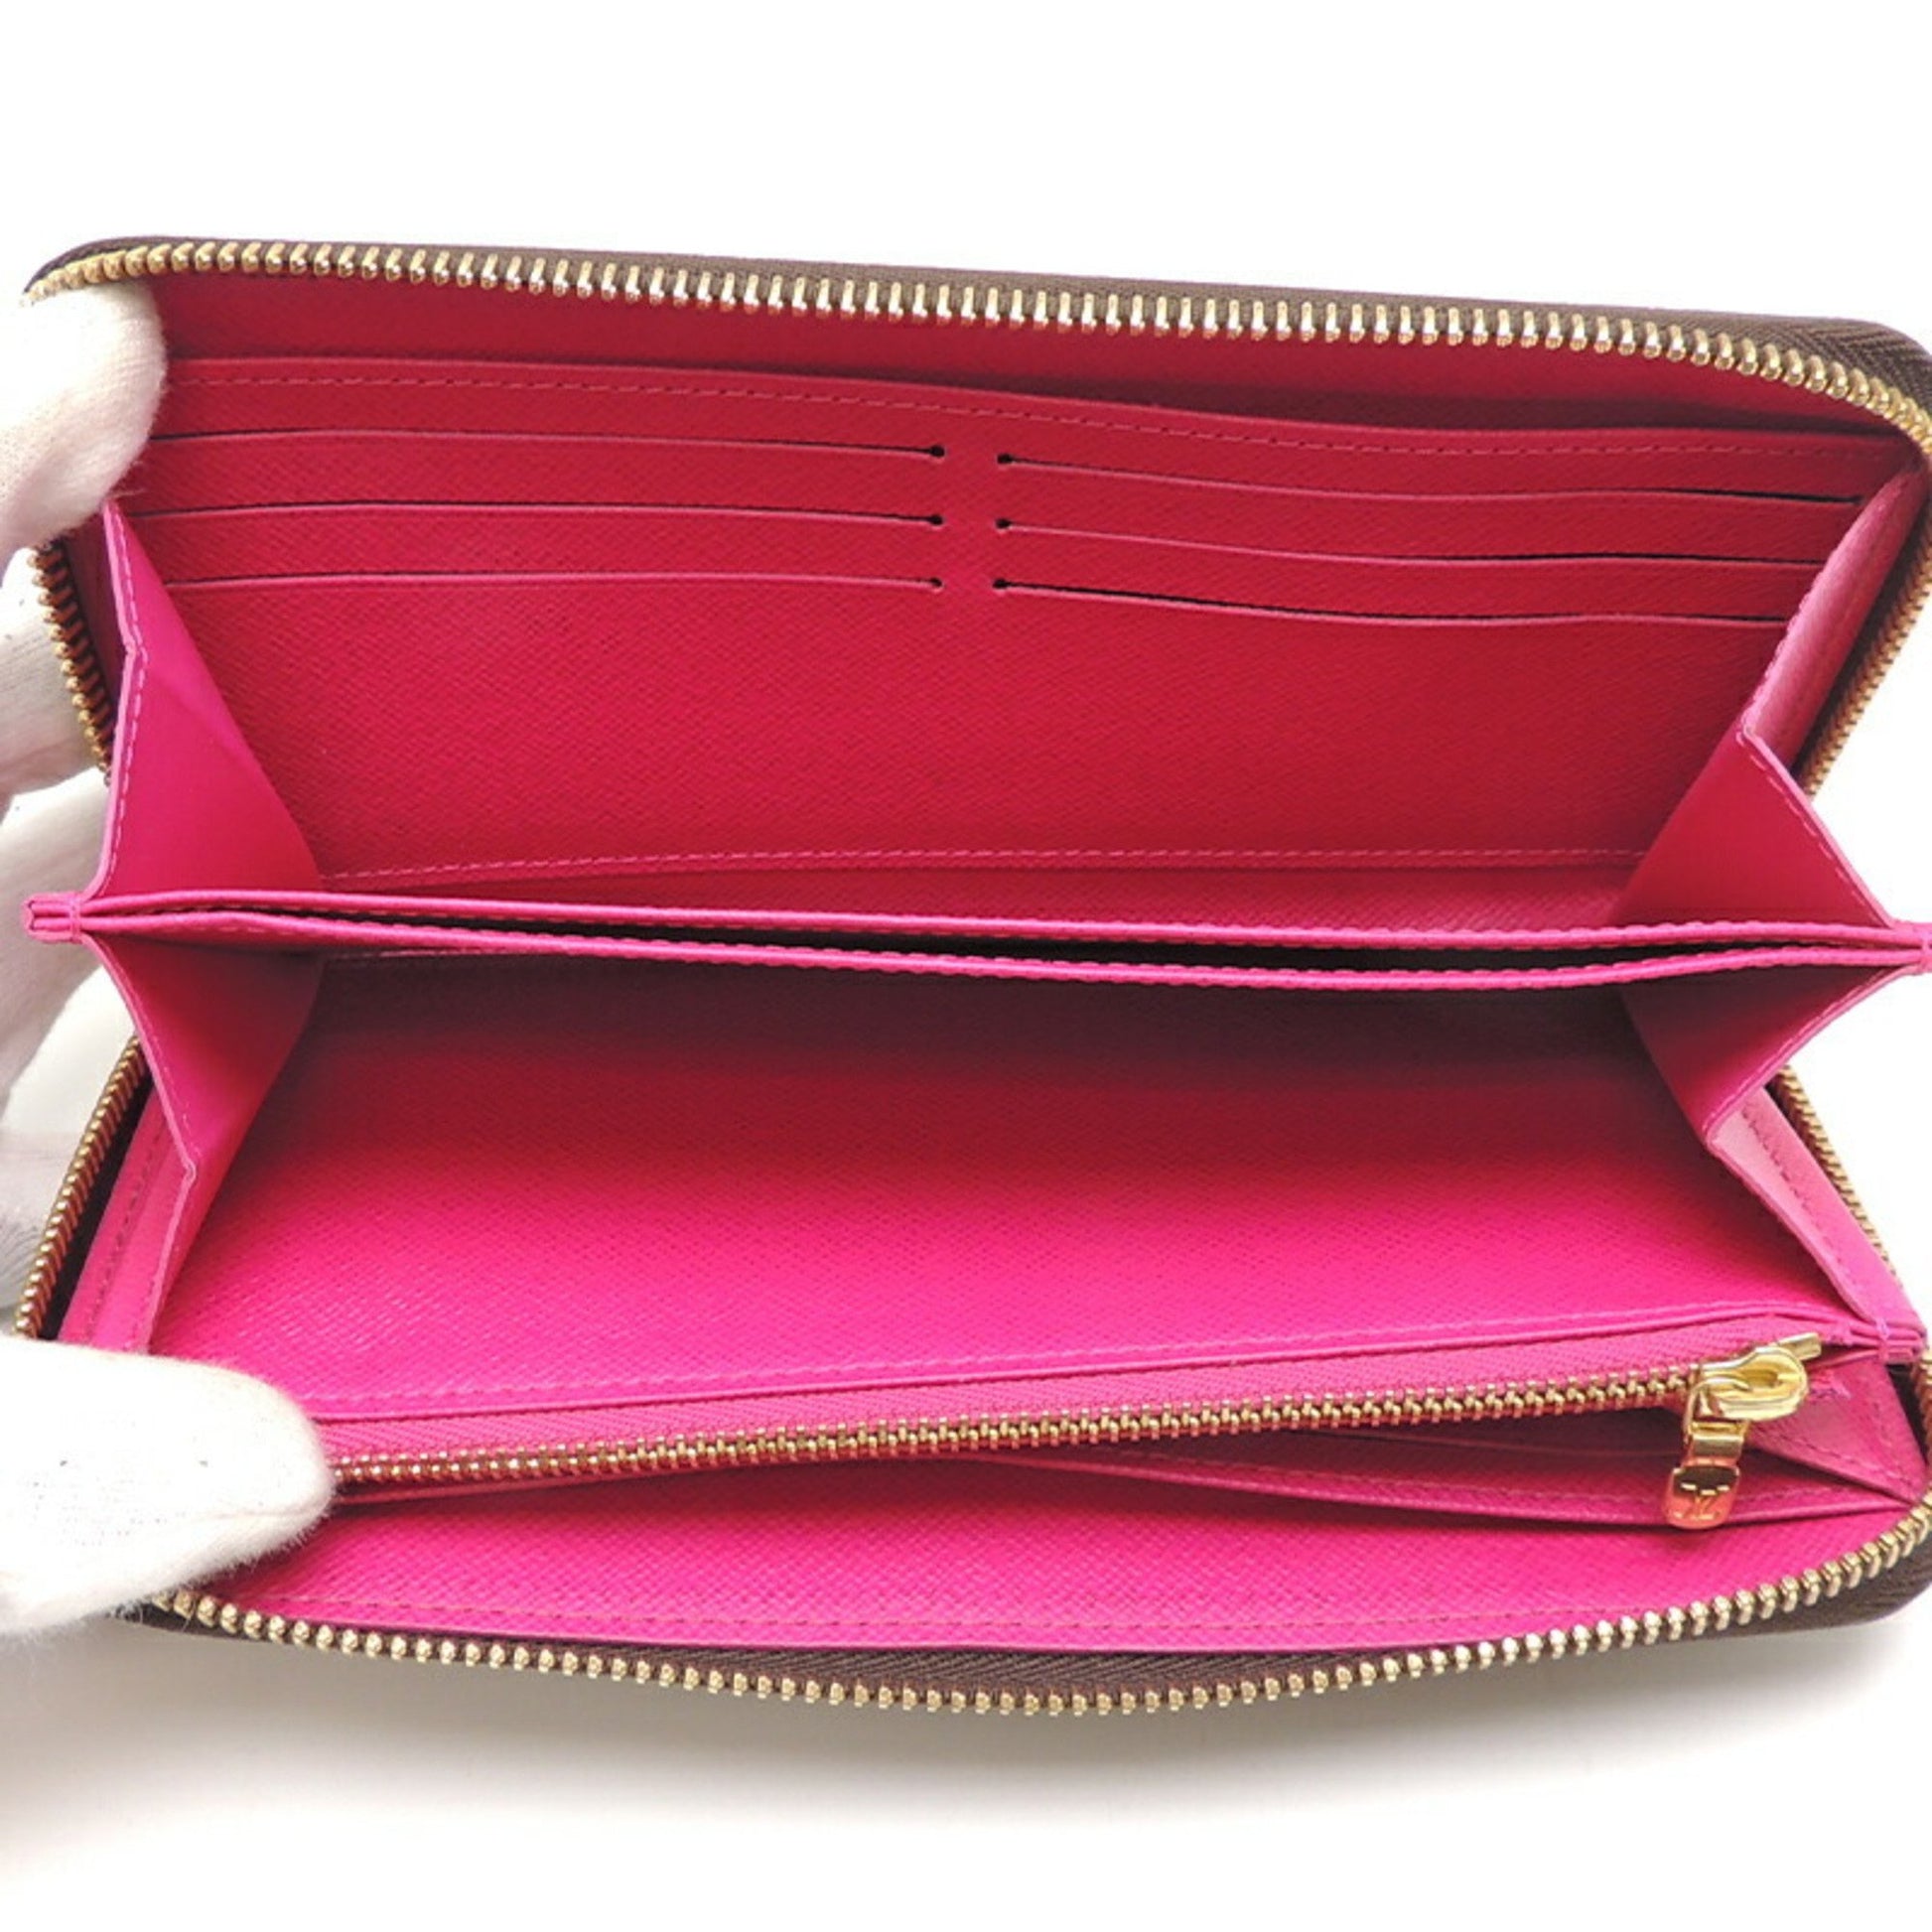 Zippy patent leather wallet Louis Vuitton Pink in Patent leather